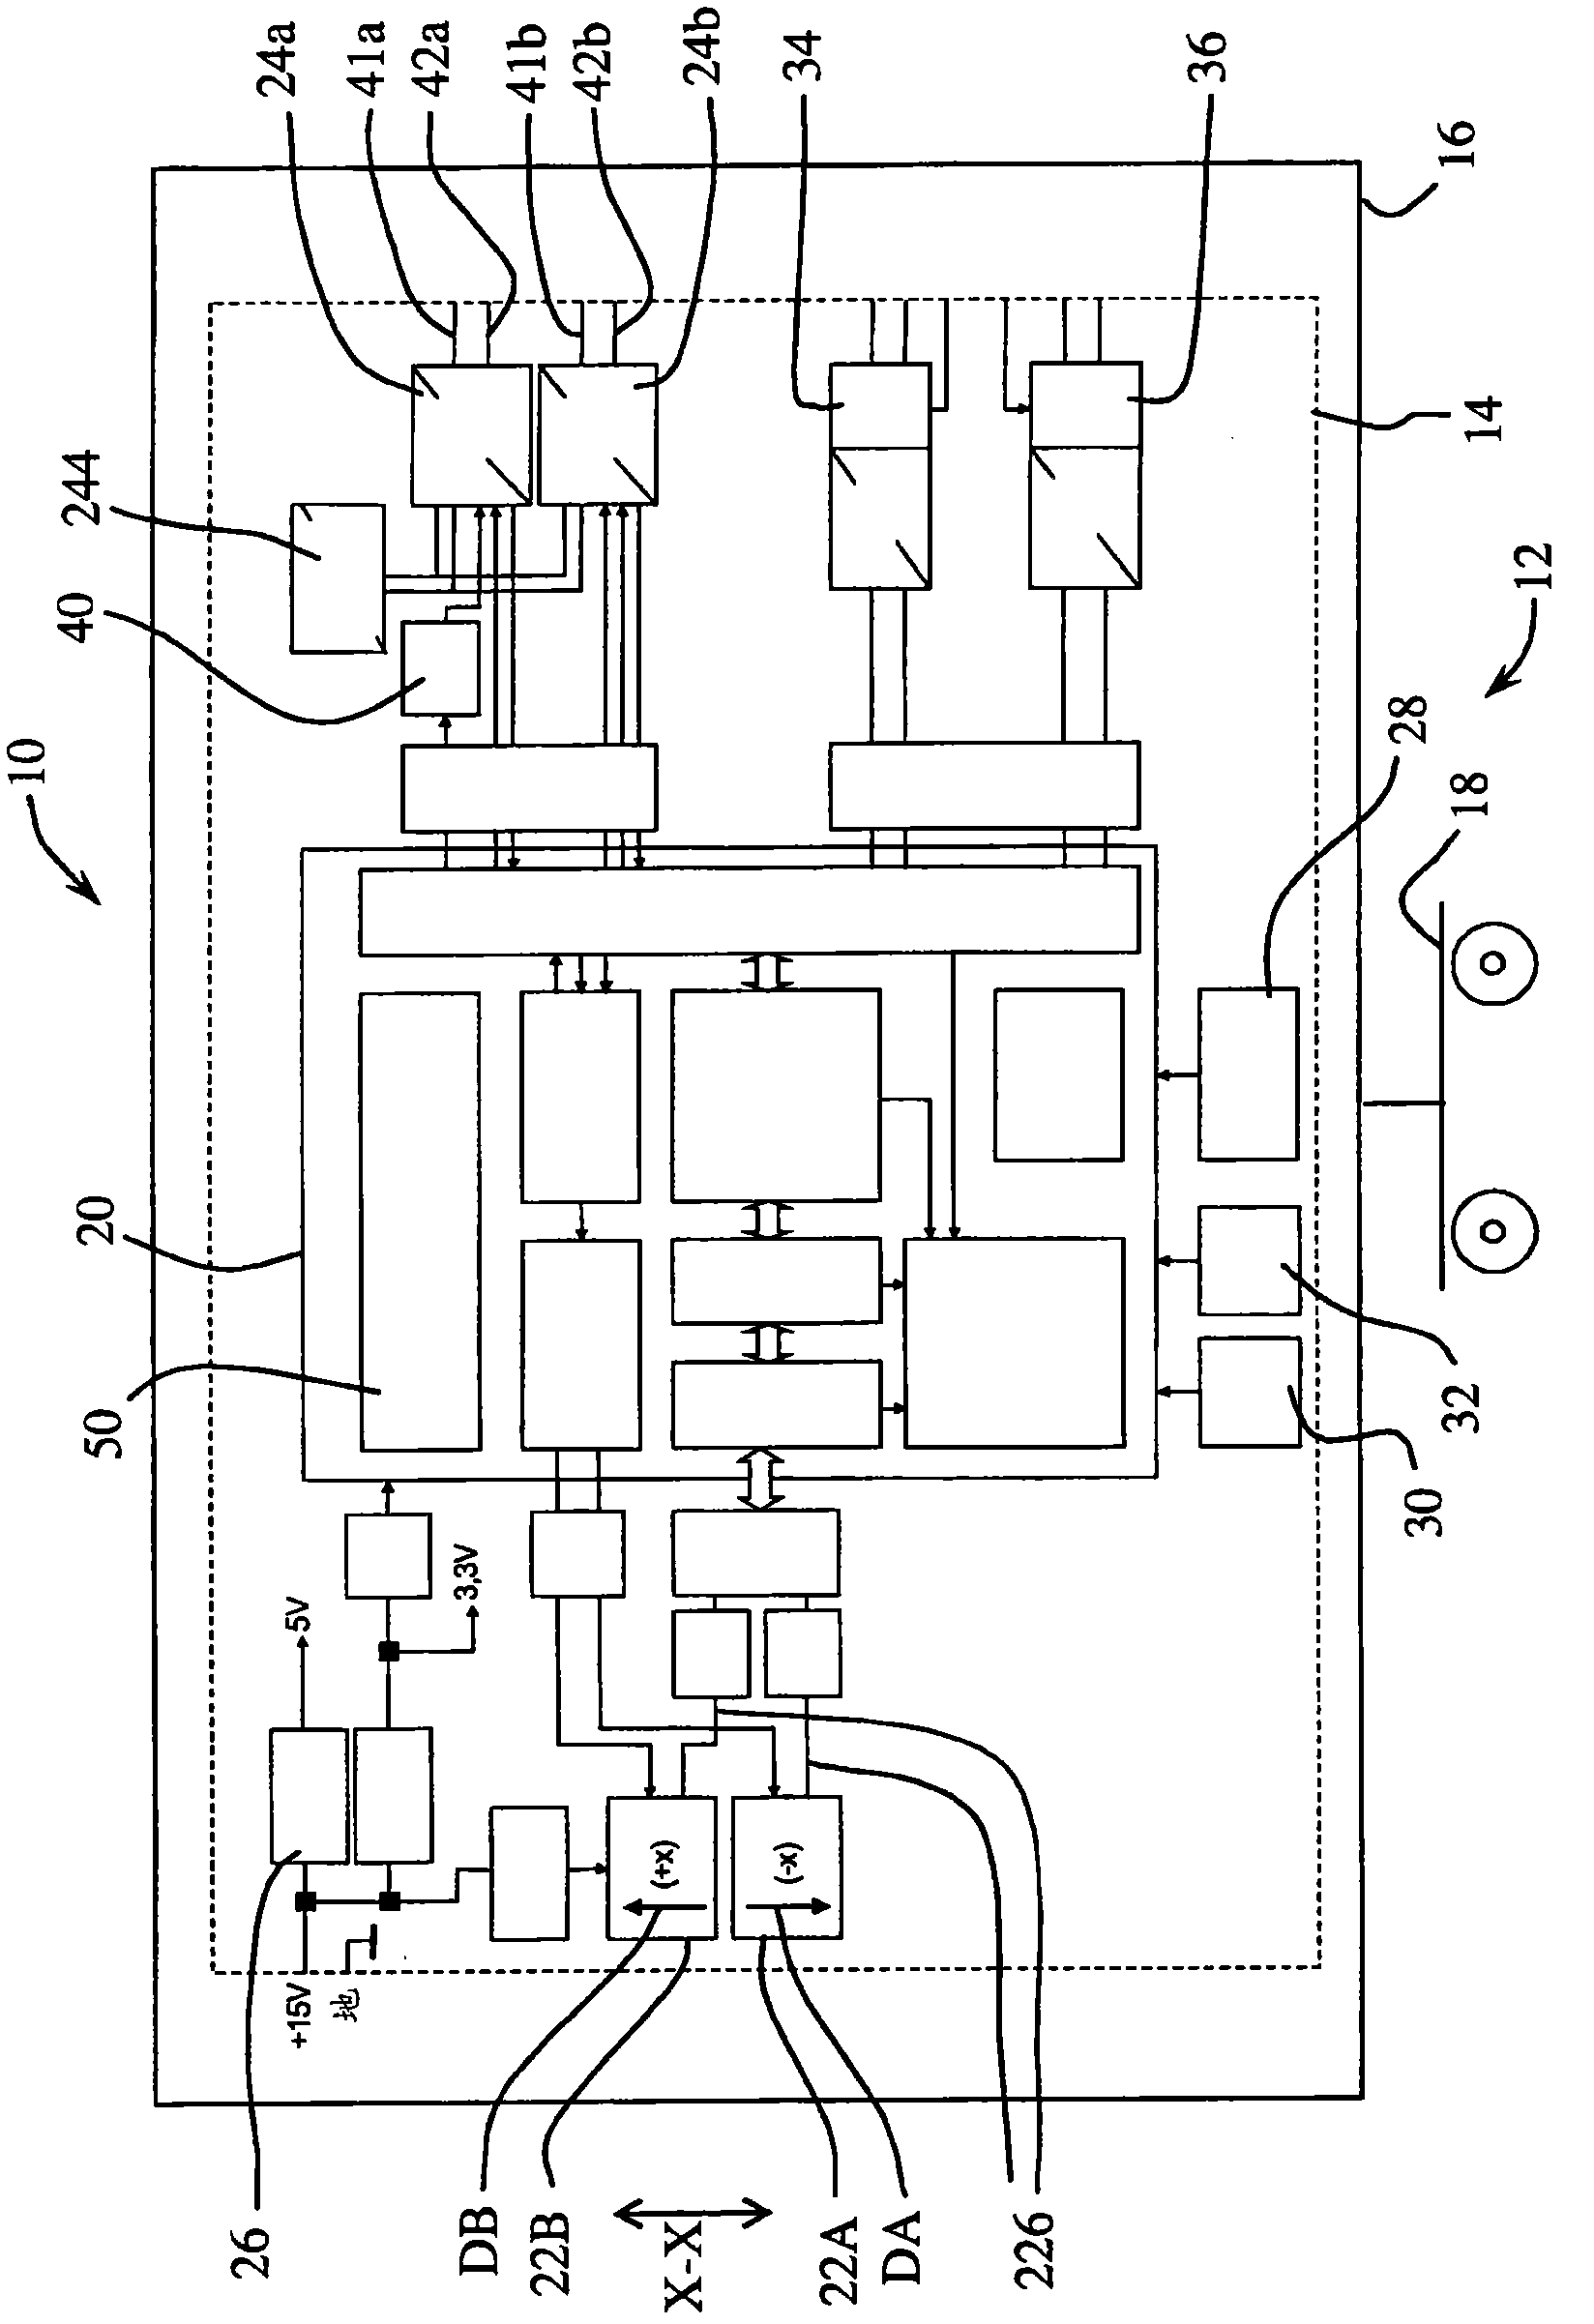 Distributed safety monitoring system provided with a safety loop and method of testing such a system